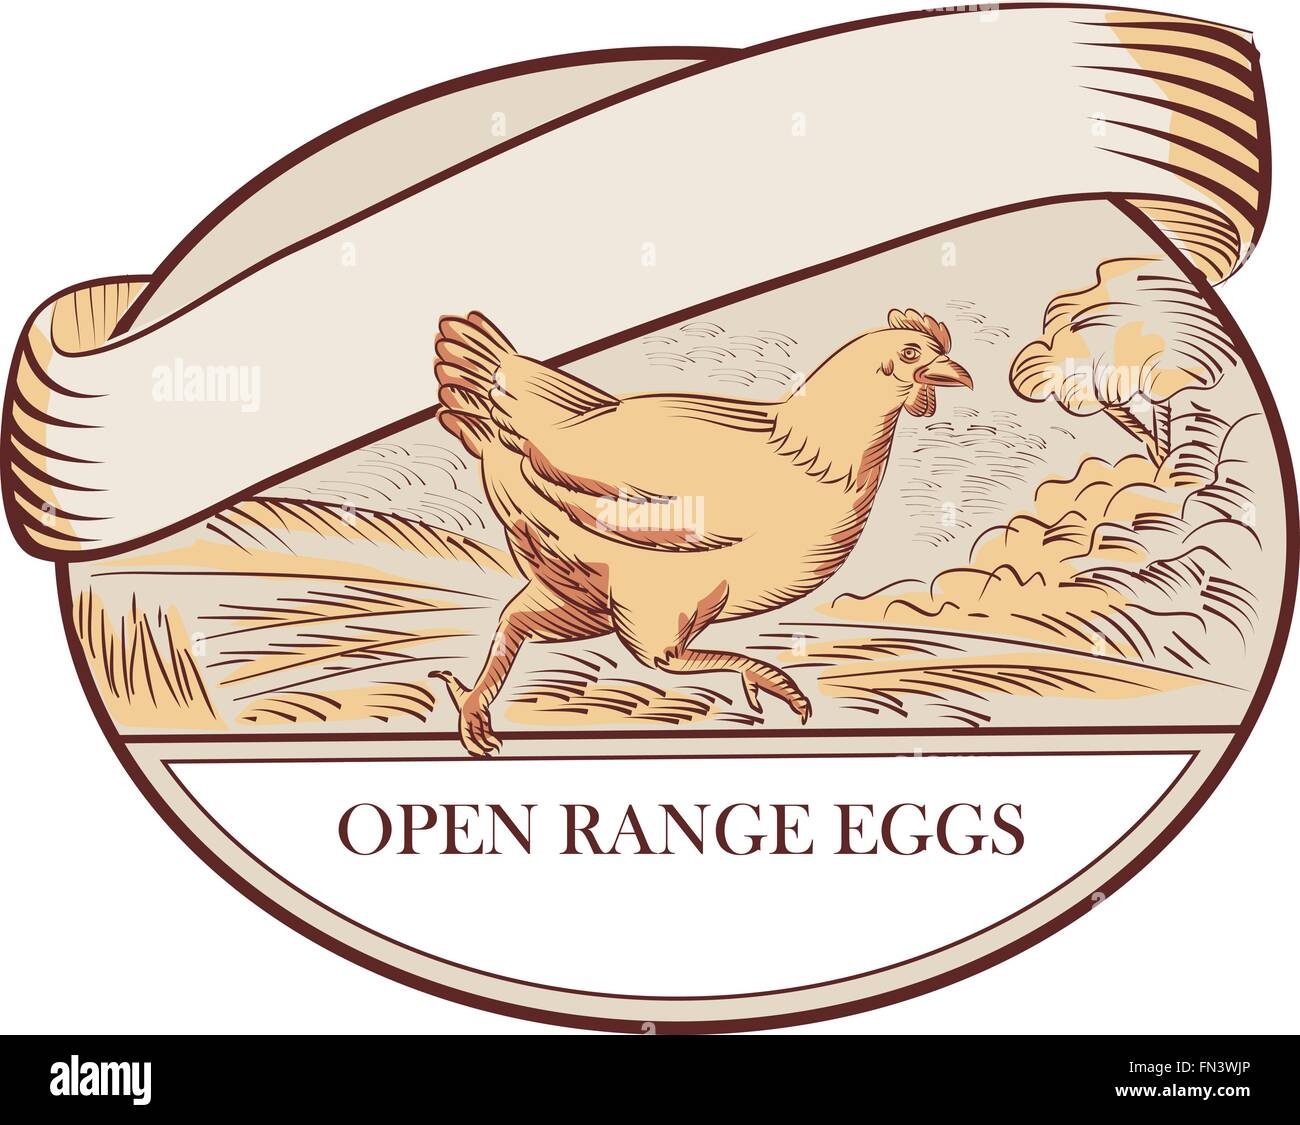 Drawing sketch style illustration of a hen running viewed from the side with farm trees in the background and Open Range Eggs label set inside oval shape. Stock Vector